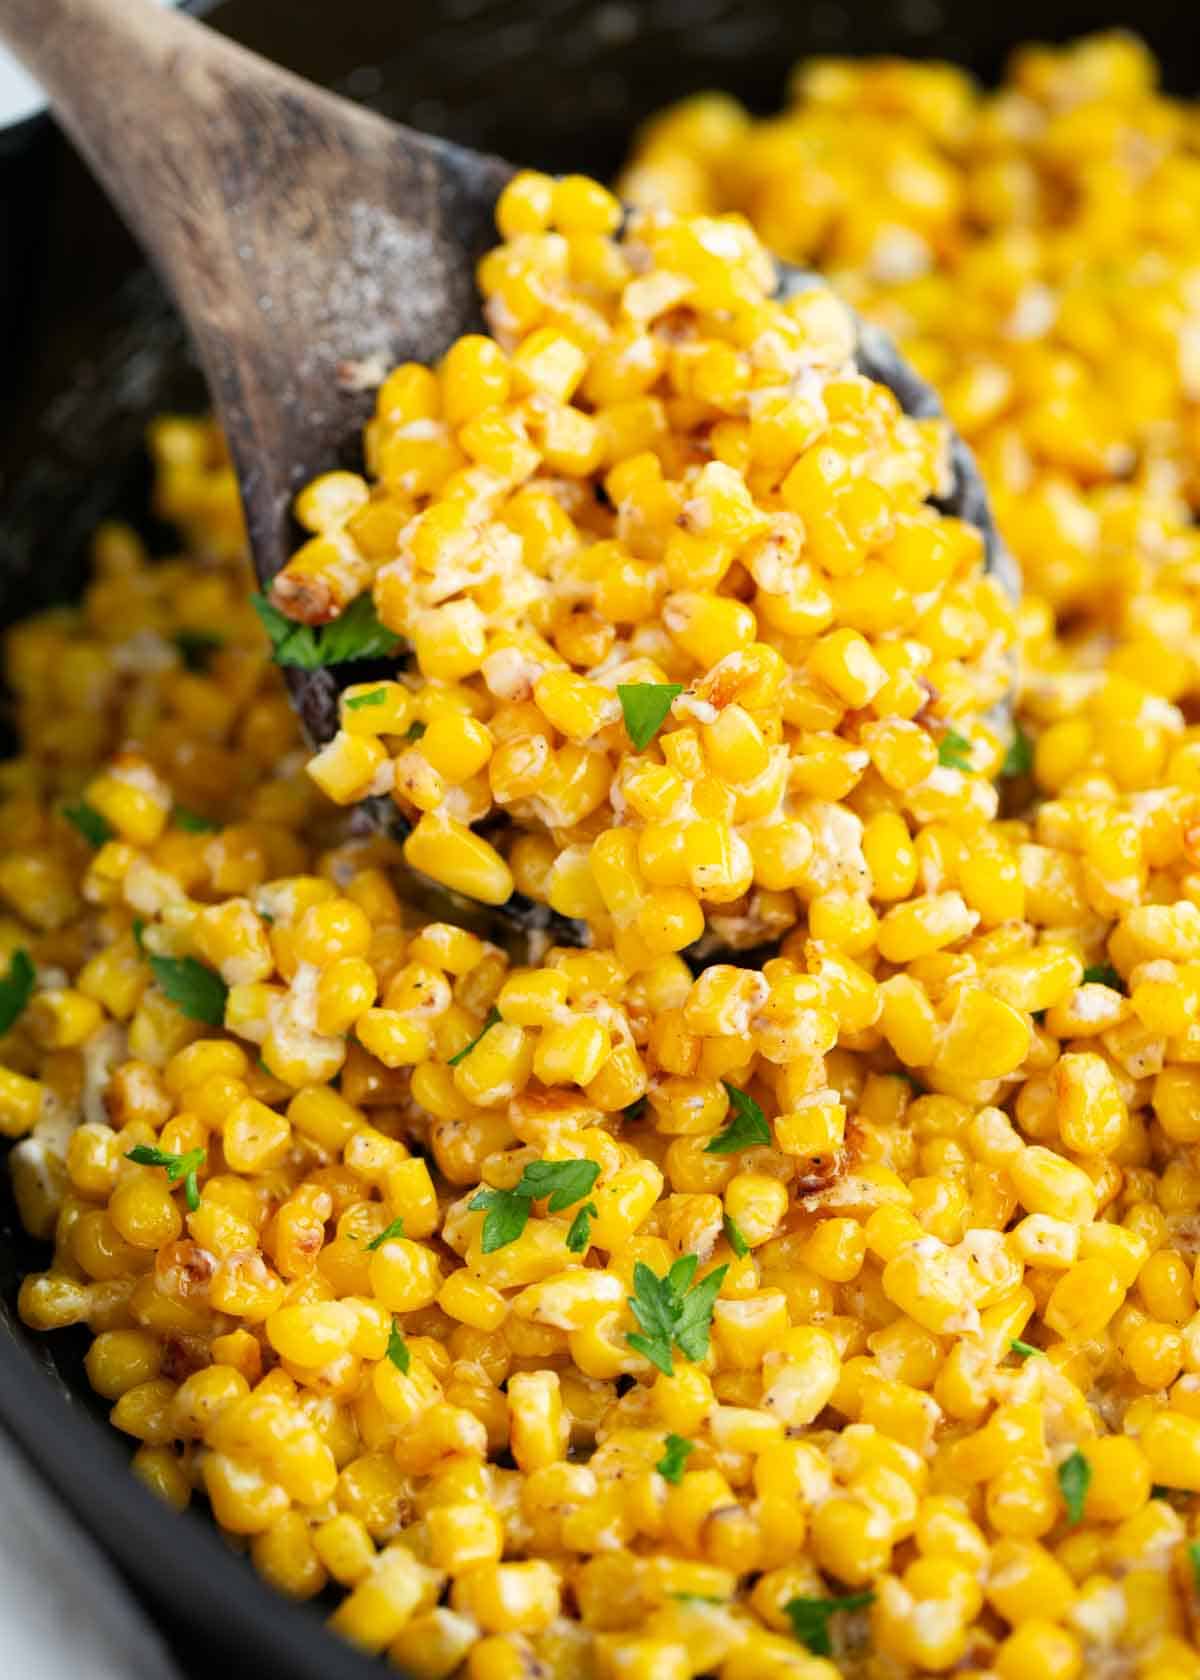 Cooking corn in an iron skillet.